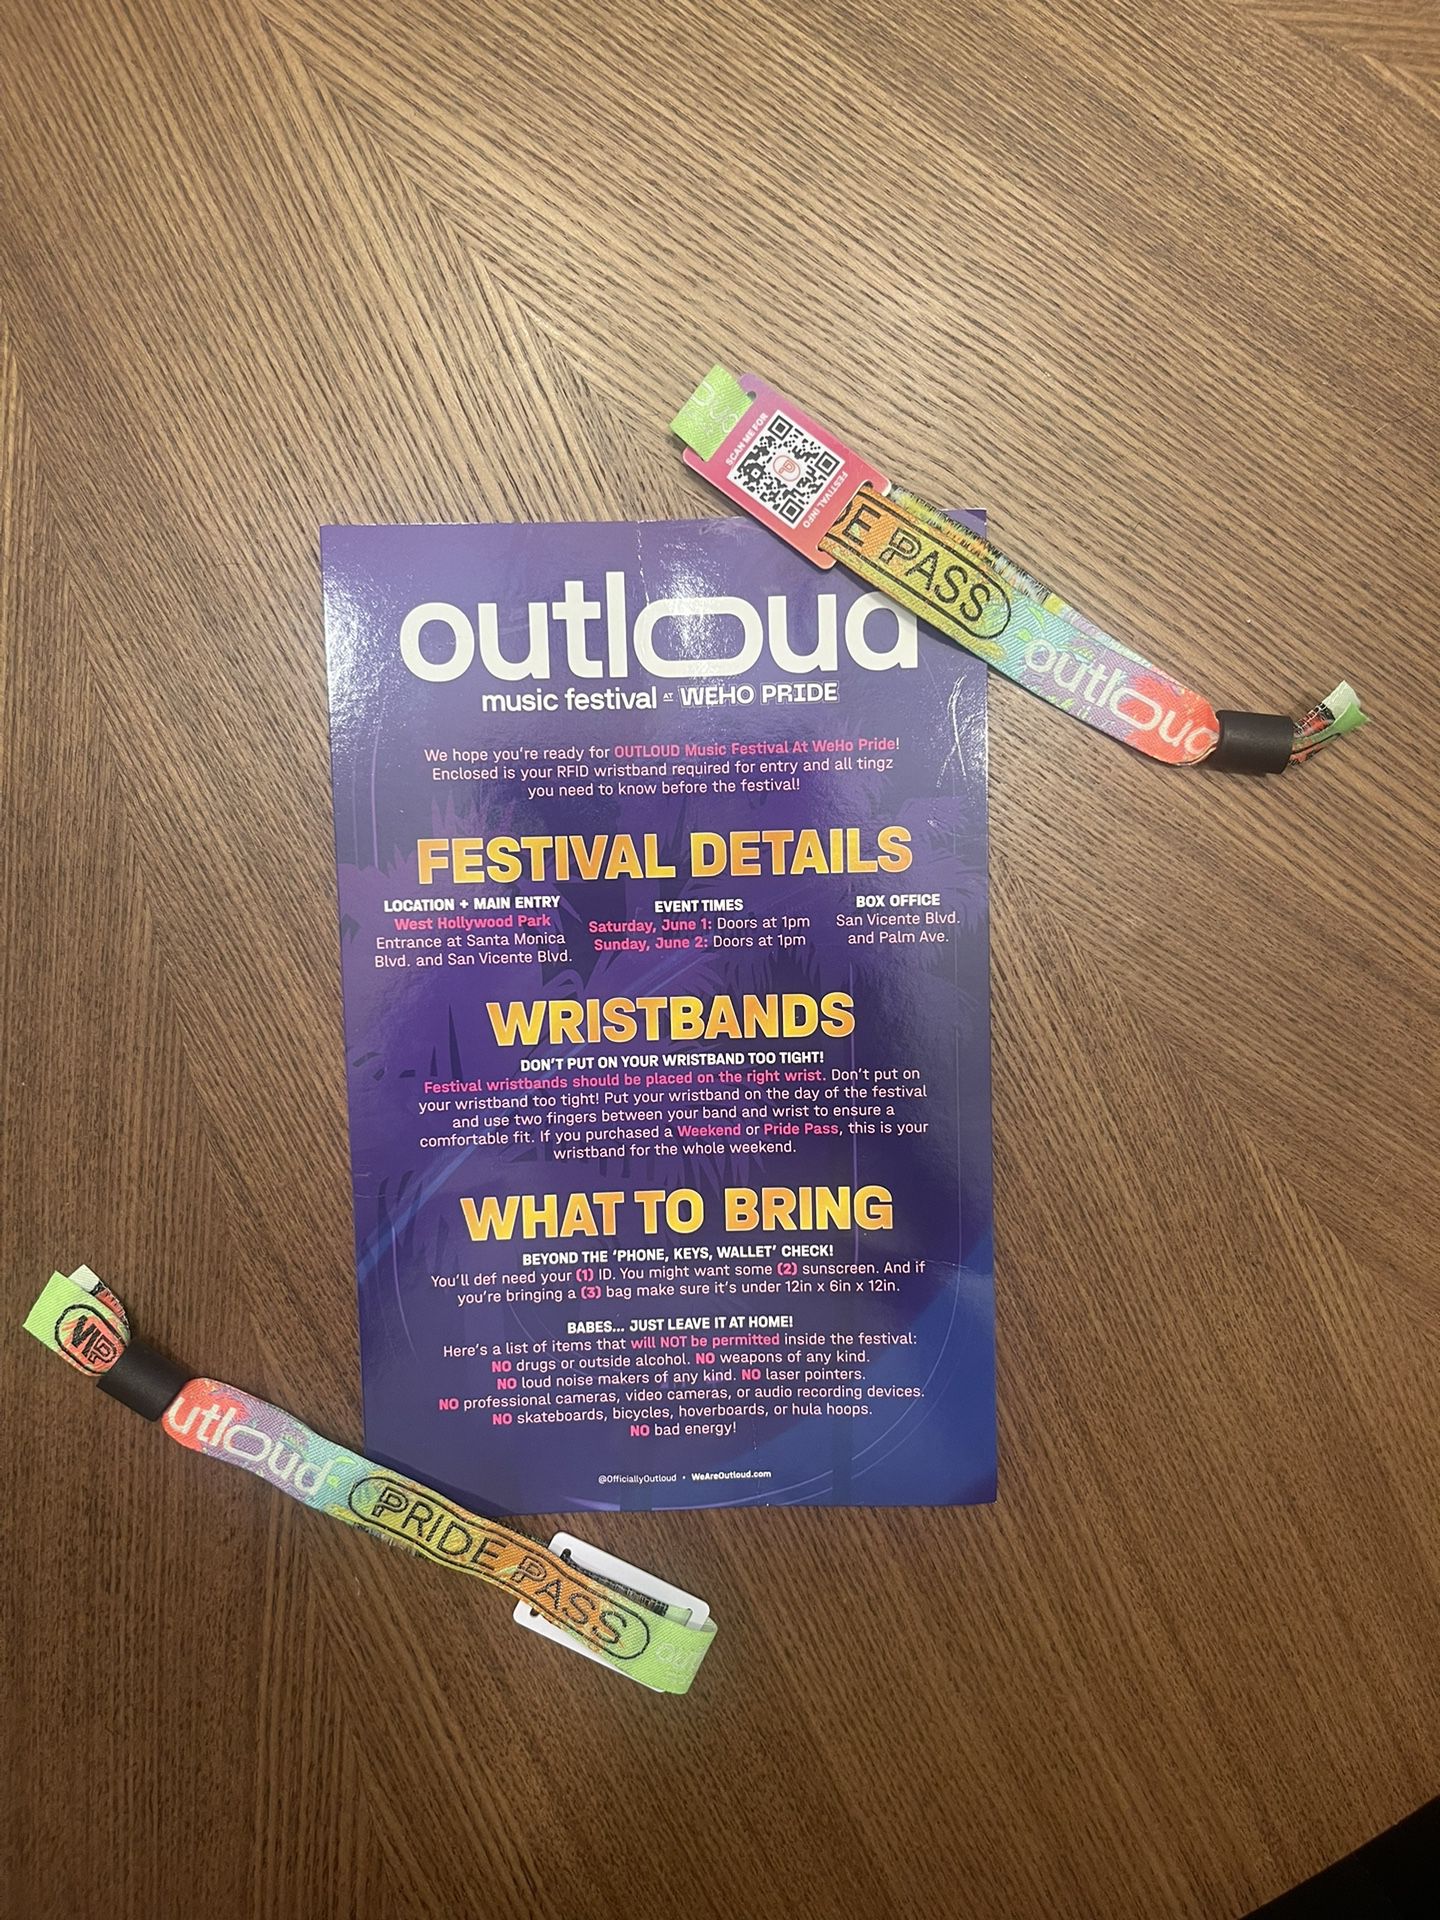 VIP WeHo Pride Pass $450 - Outloud Festival - KYLIE